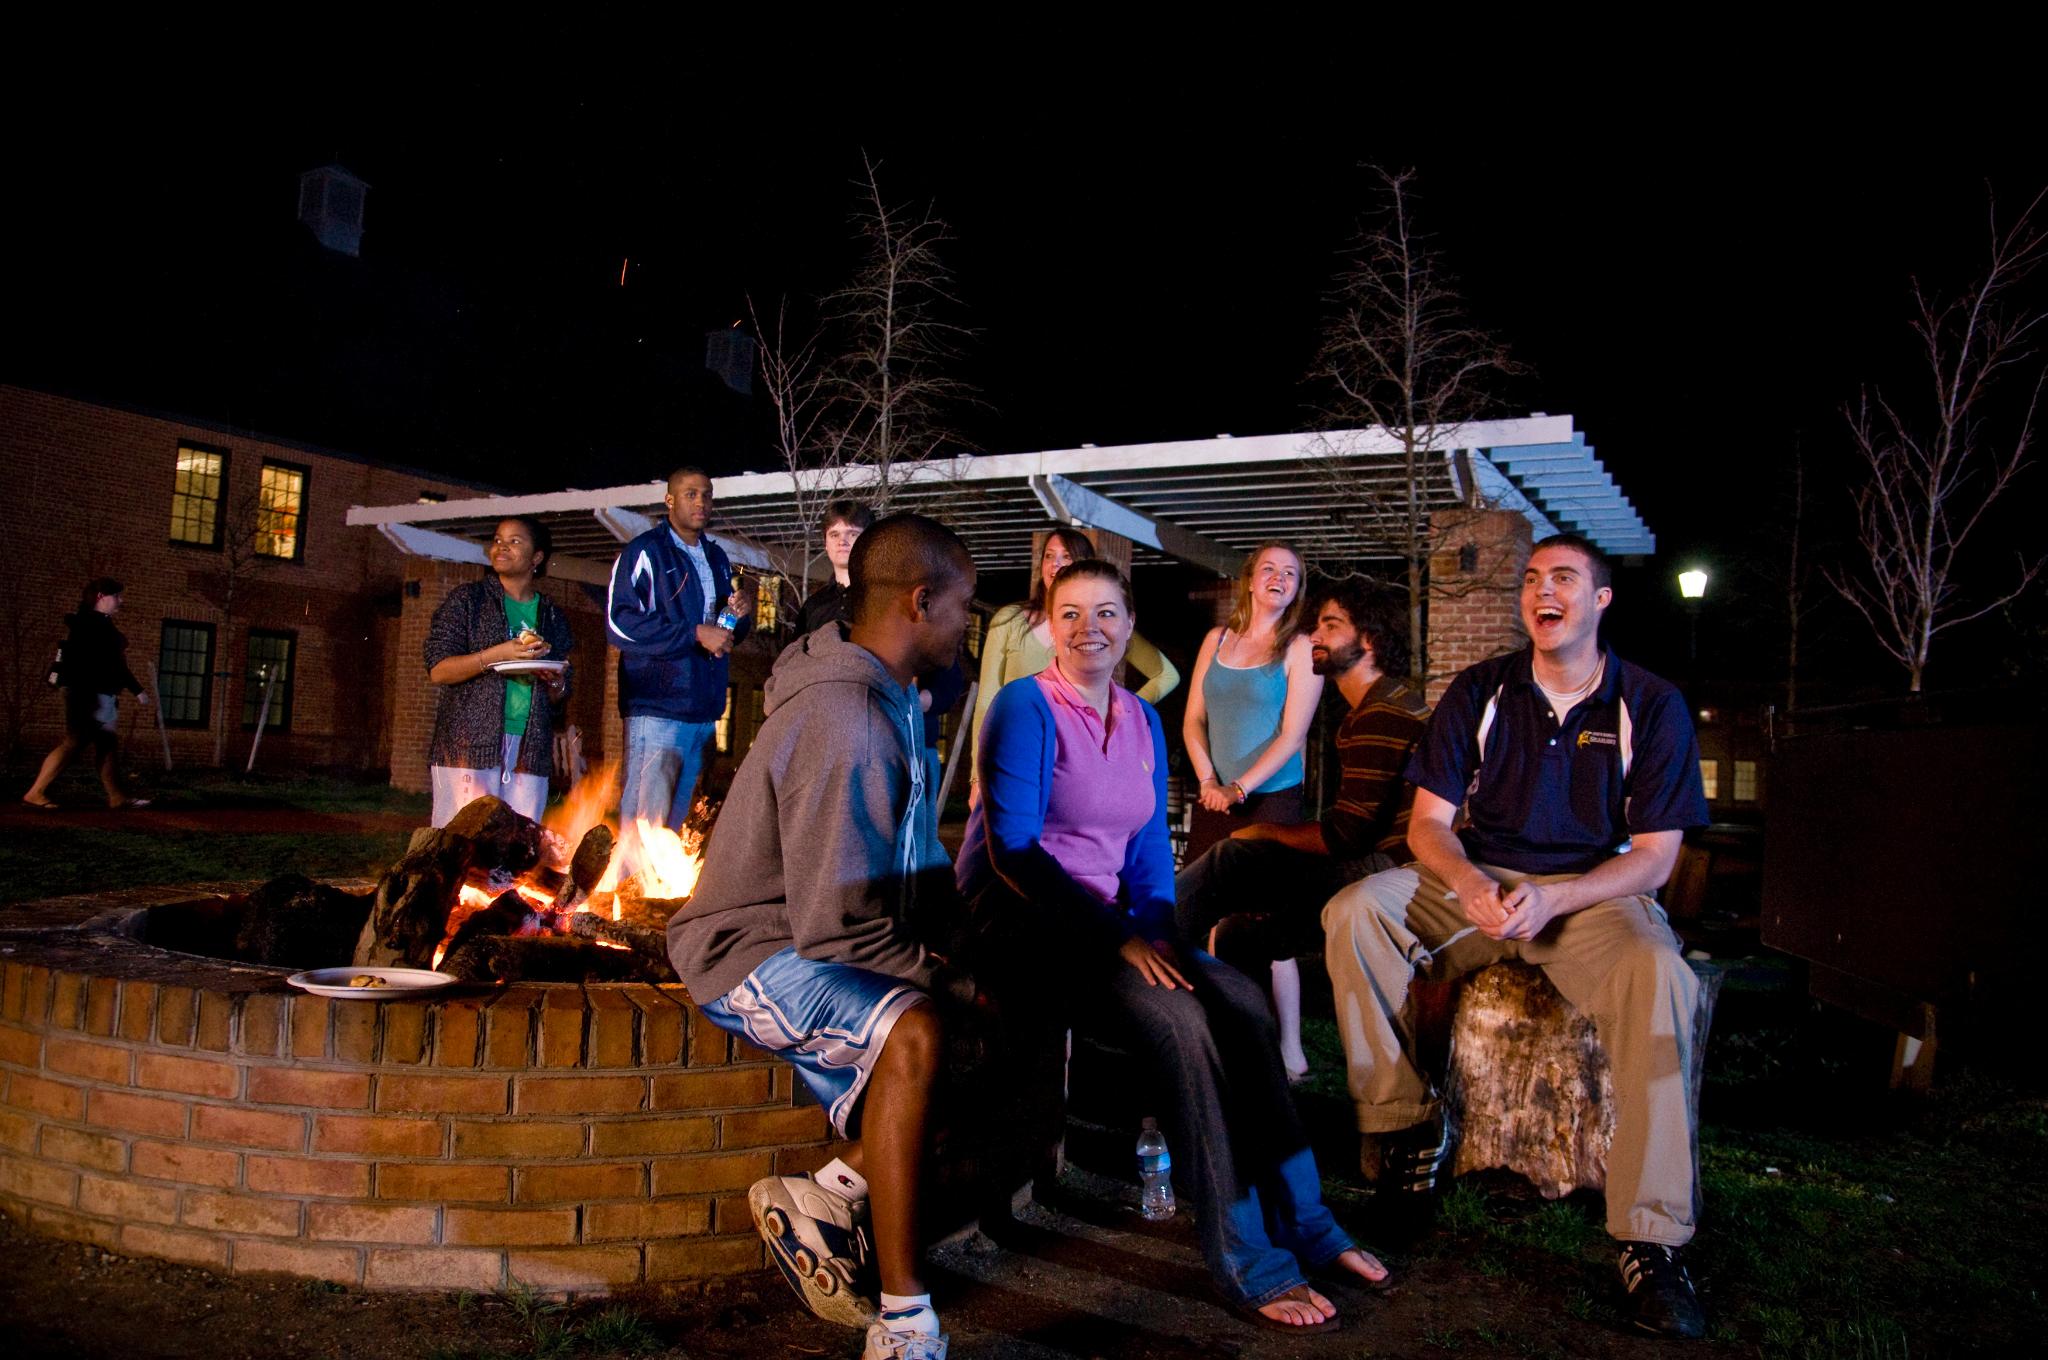 The fire pit with a large number of students gathered around